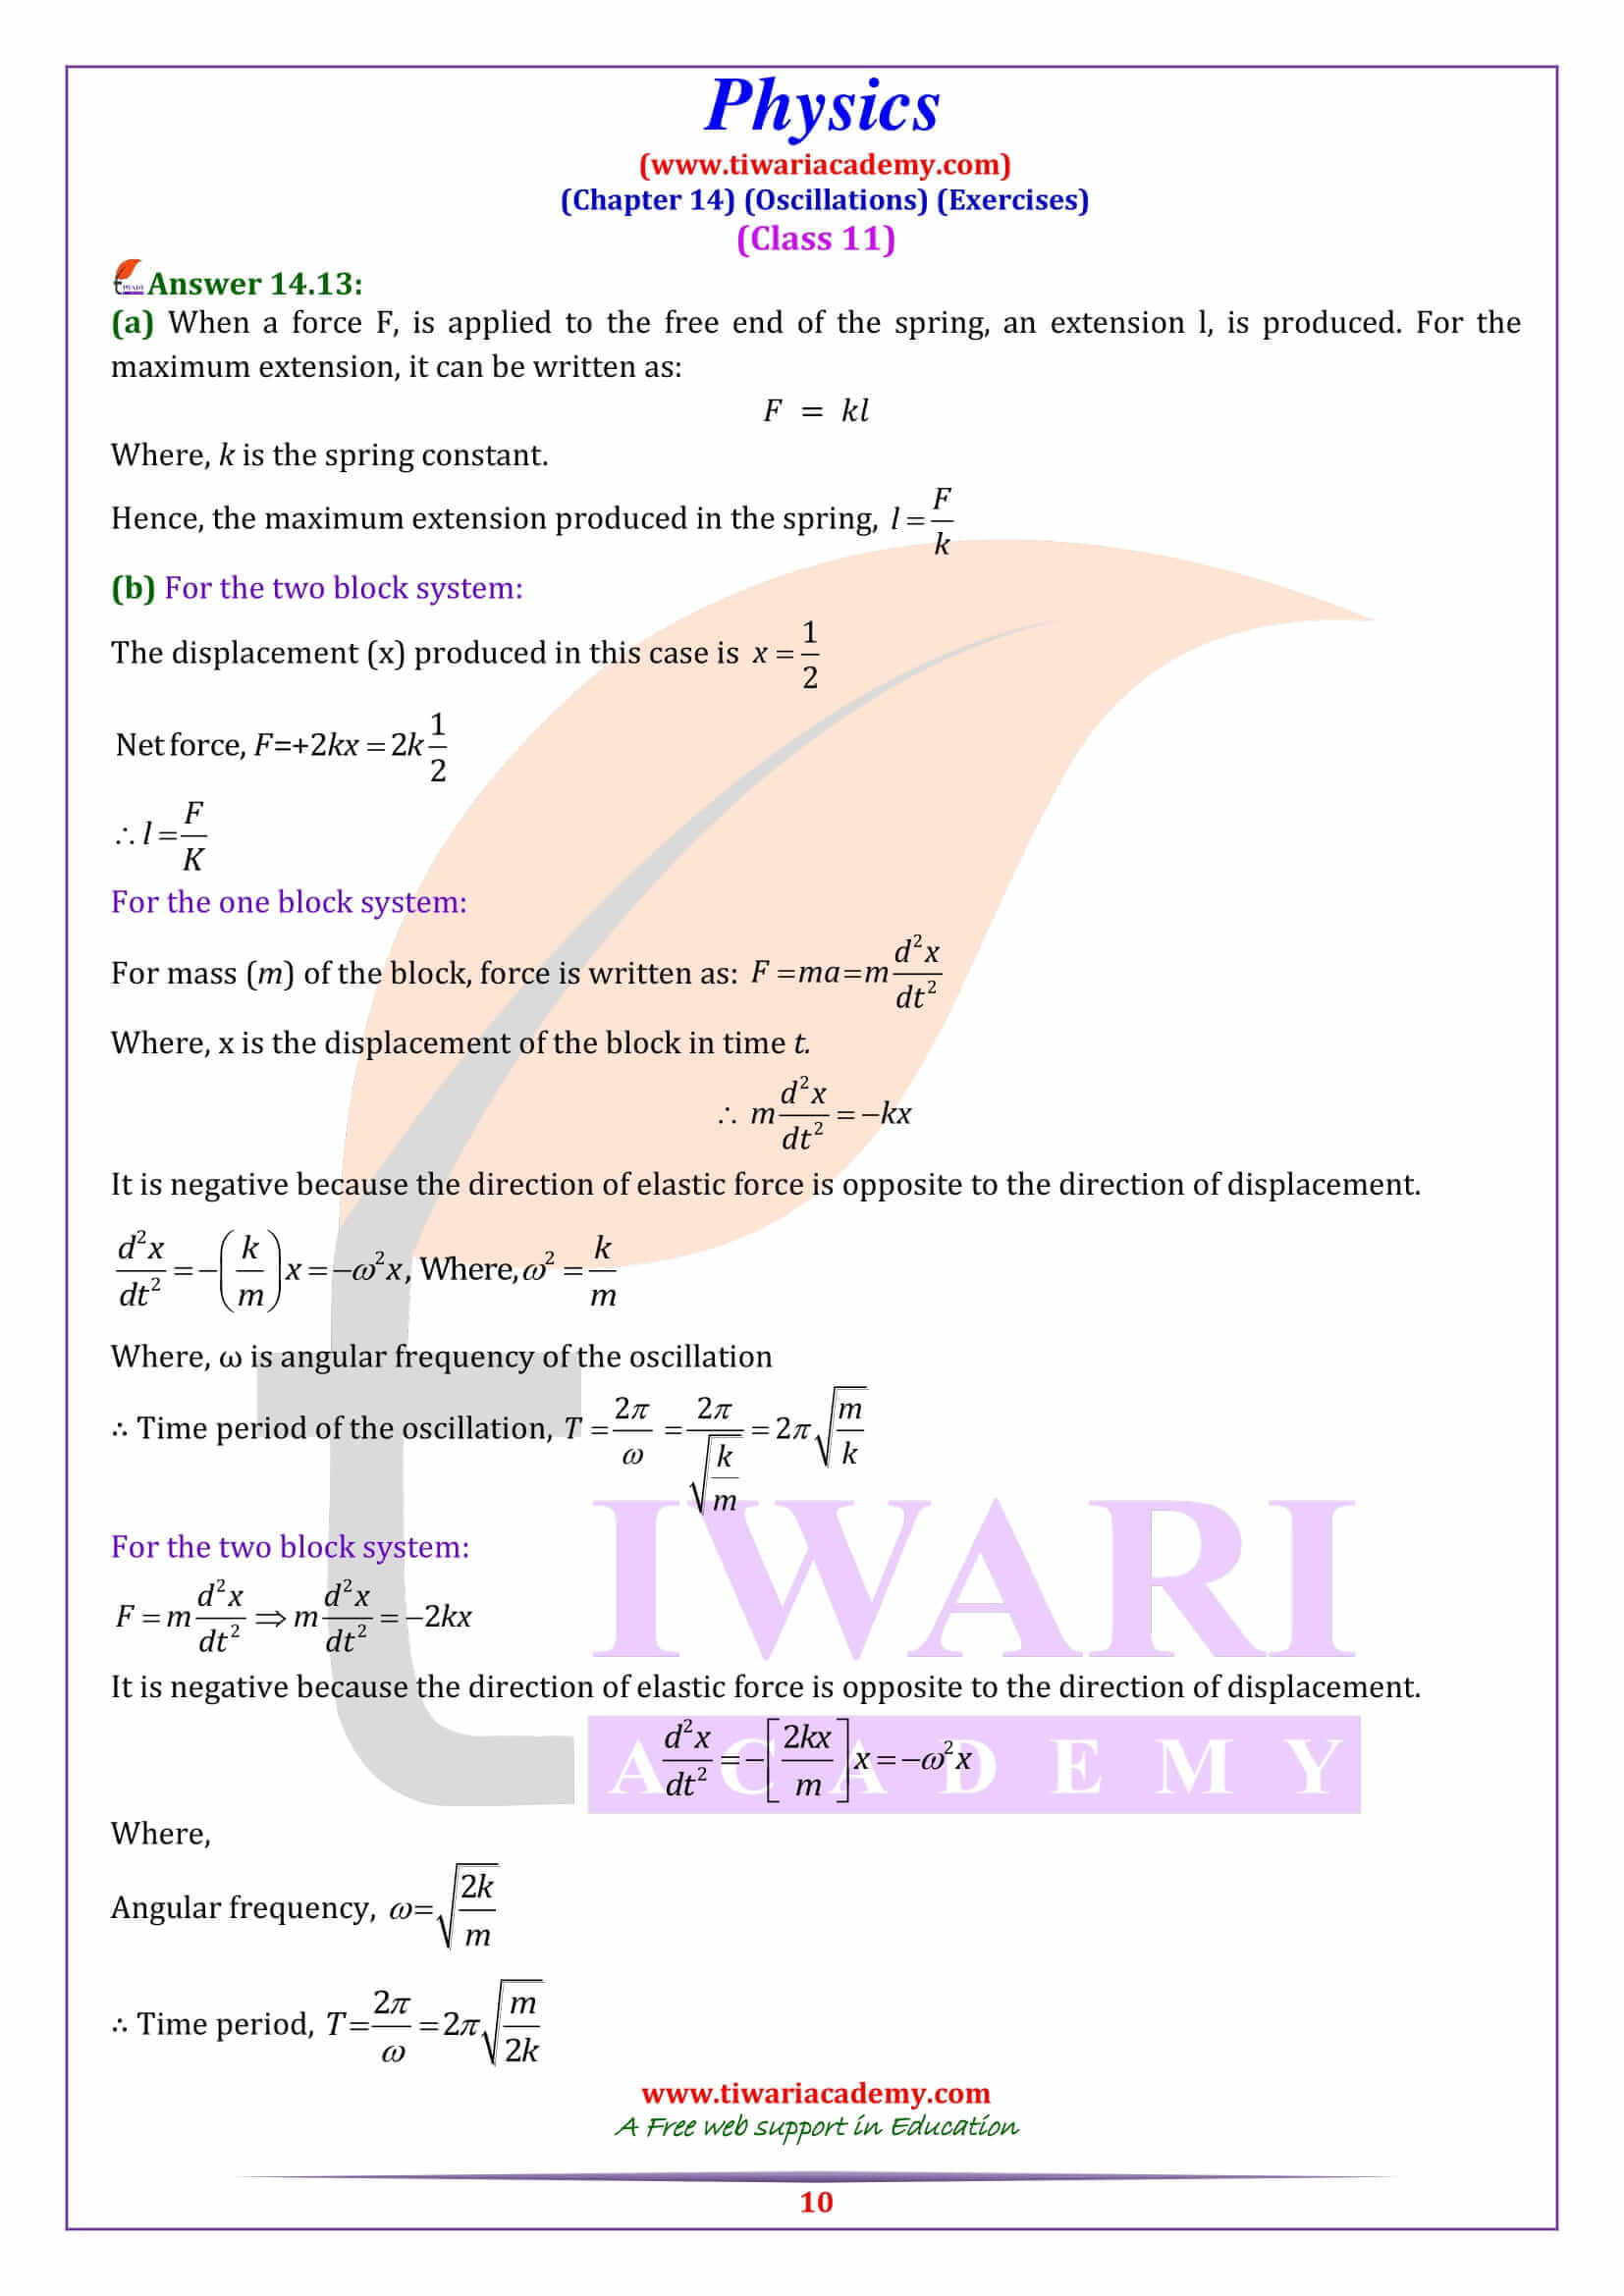 Class 11 Physics Chapter 14 Answers in PDF